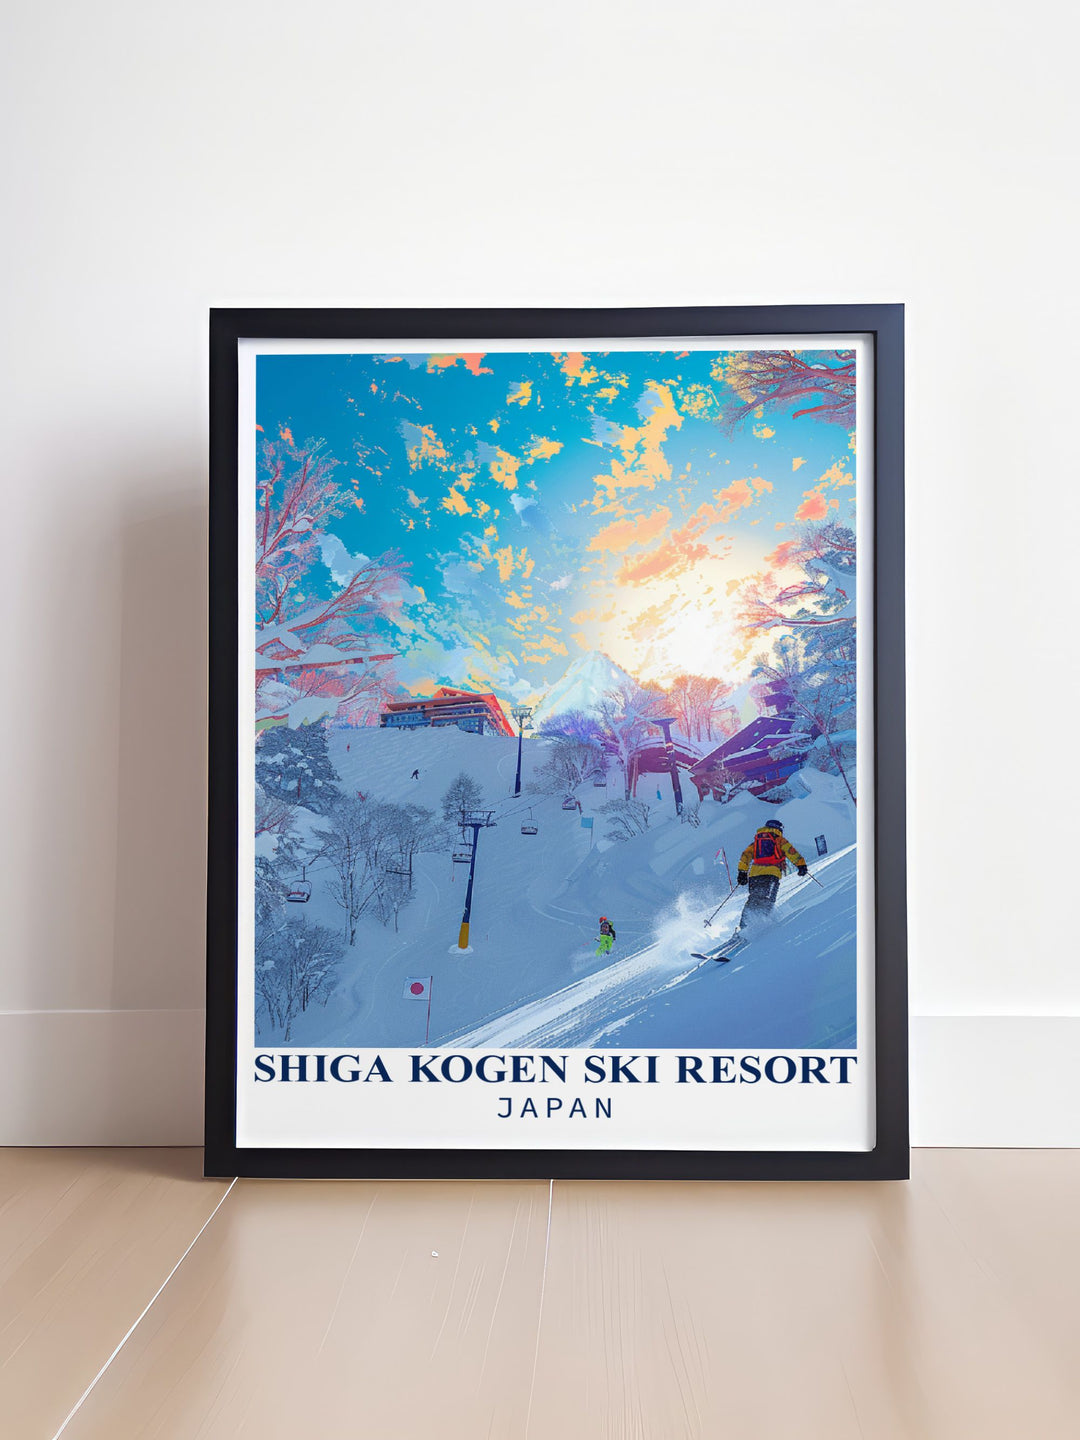 This travel poster showcases the majestic Japanese Alps, highlighting their breathtaking peaks and serene beauty, ideal for those who love nature and winter sports.